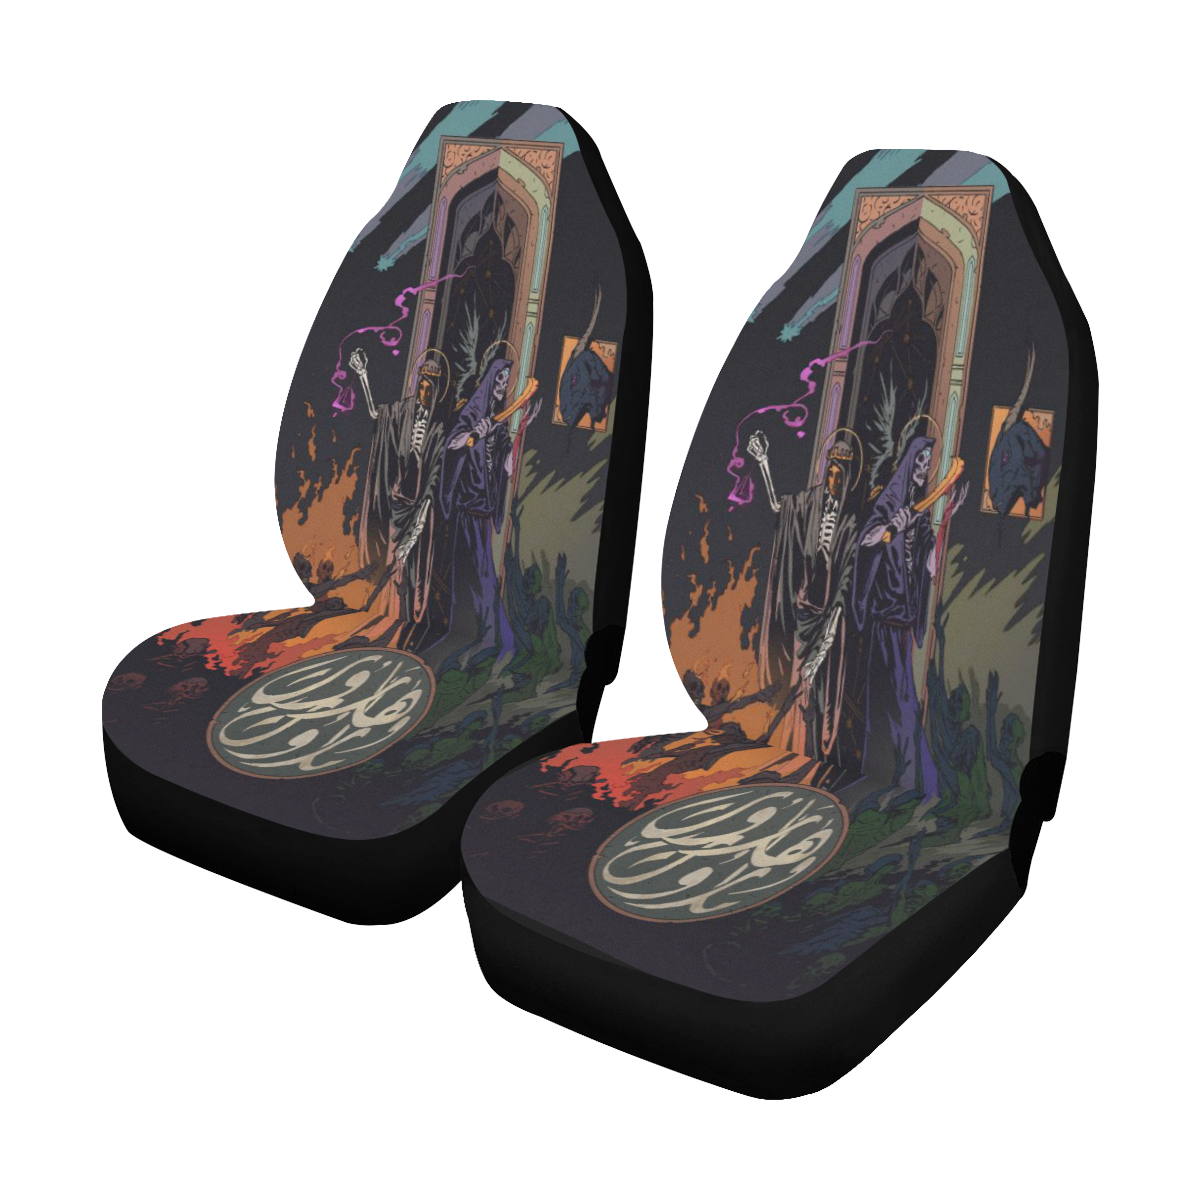 Harot-and-Marot-by-Ibrahem-Swaid Seat Cobers Seat Covers Car Seat Covers (Set of 2)